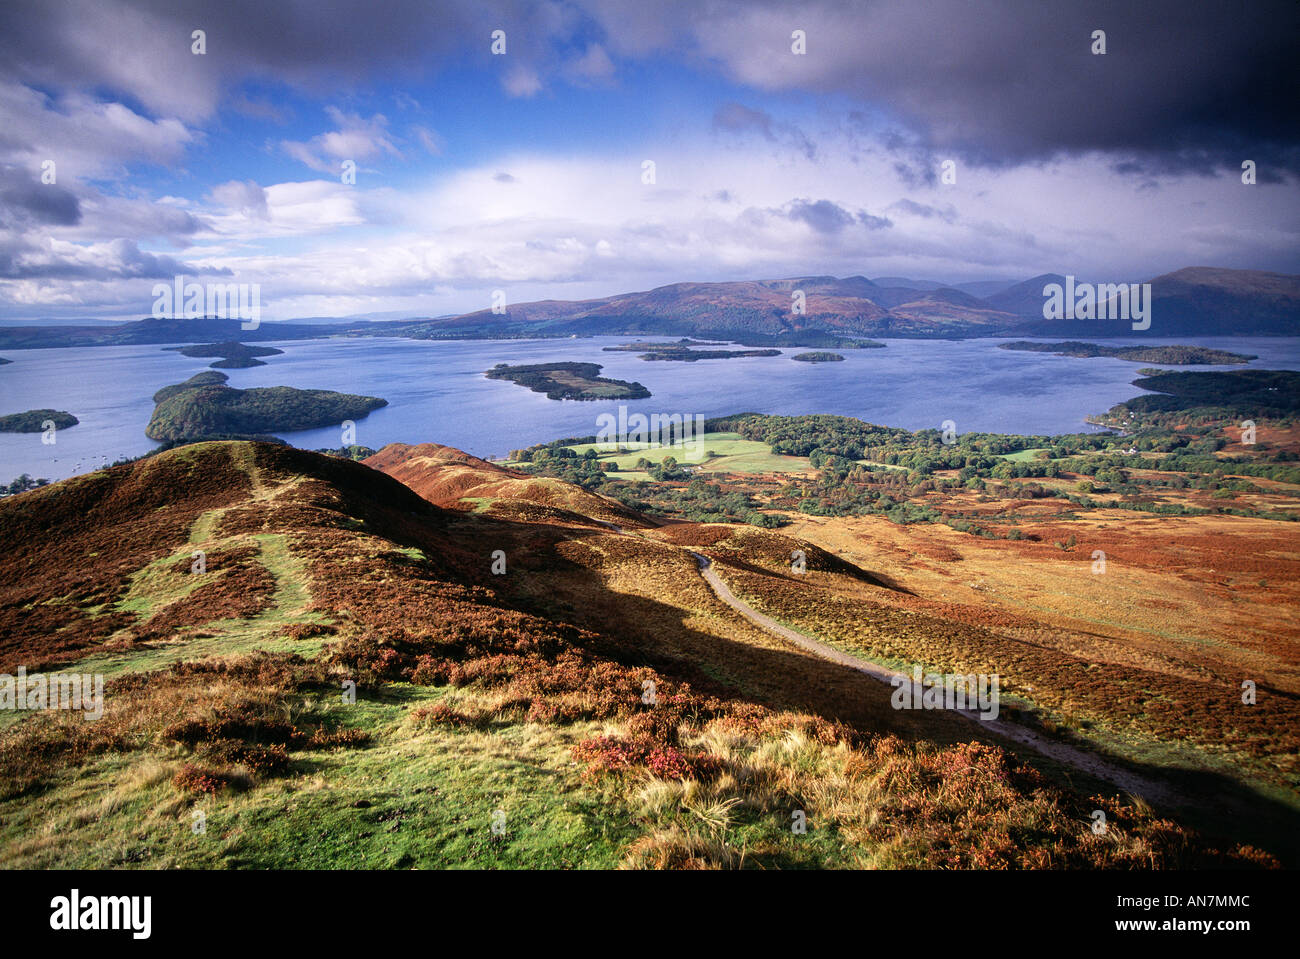 View of Loch Lomond from the top of Conic Hill Stock Photo